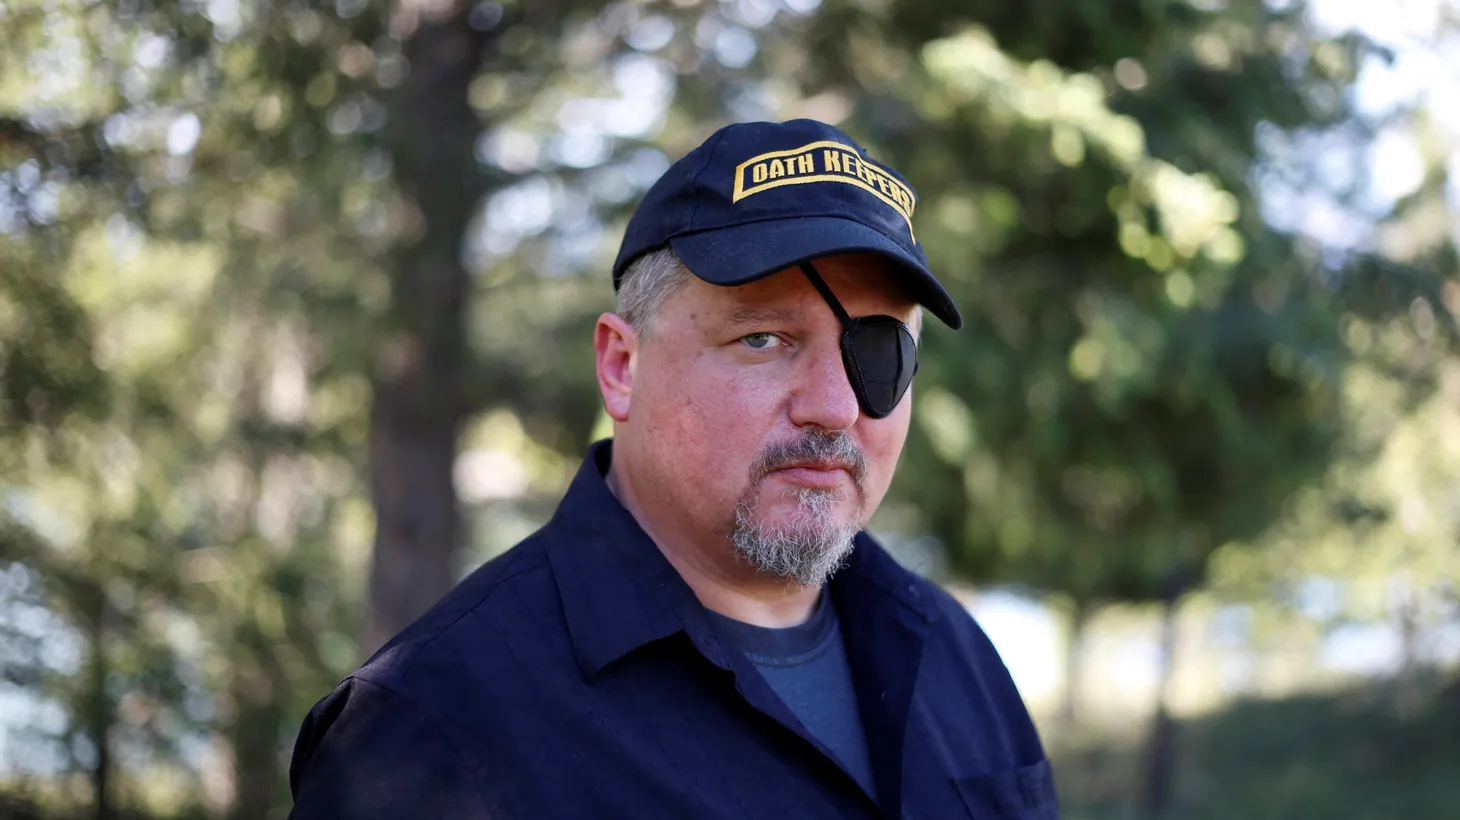 Oath Keepers militia founder Stewart Rhodes poses during an interview session in Eureka, Montana, U.S. June 20, 2016.